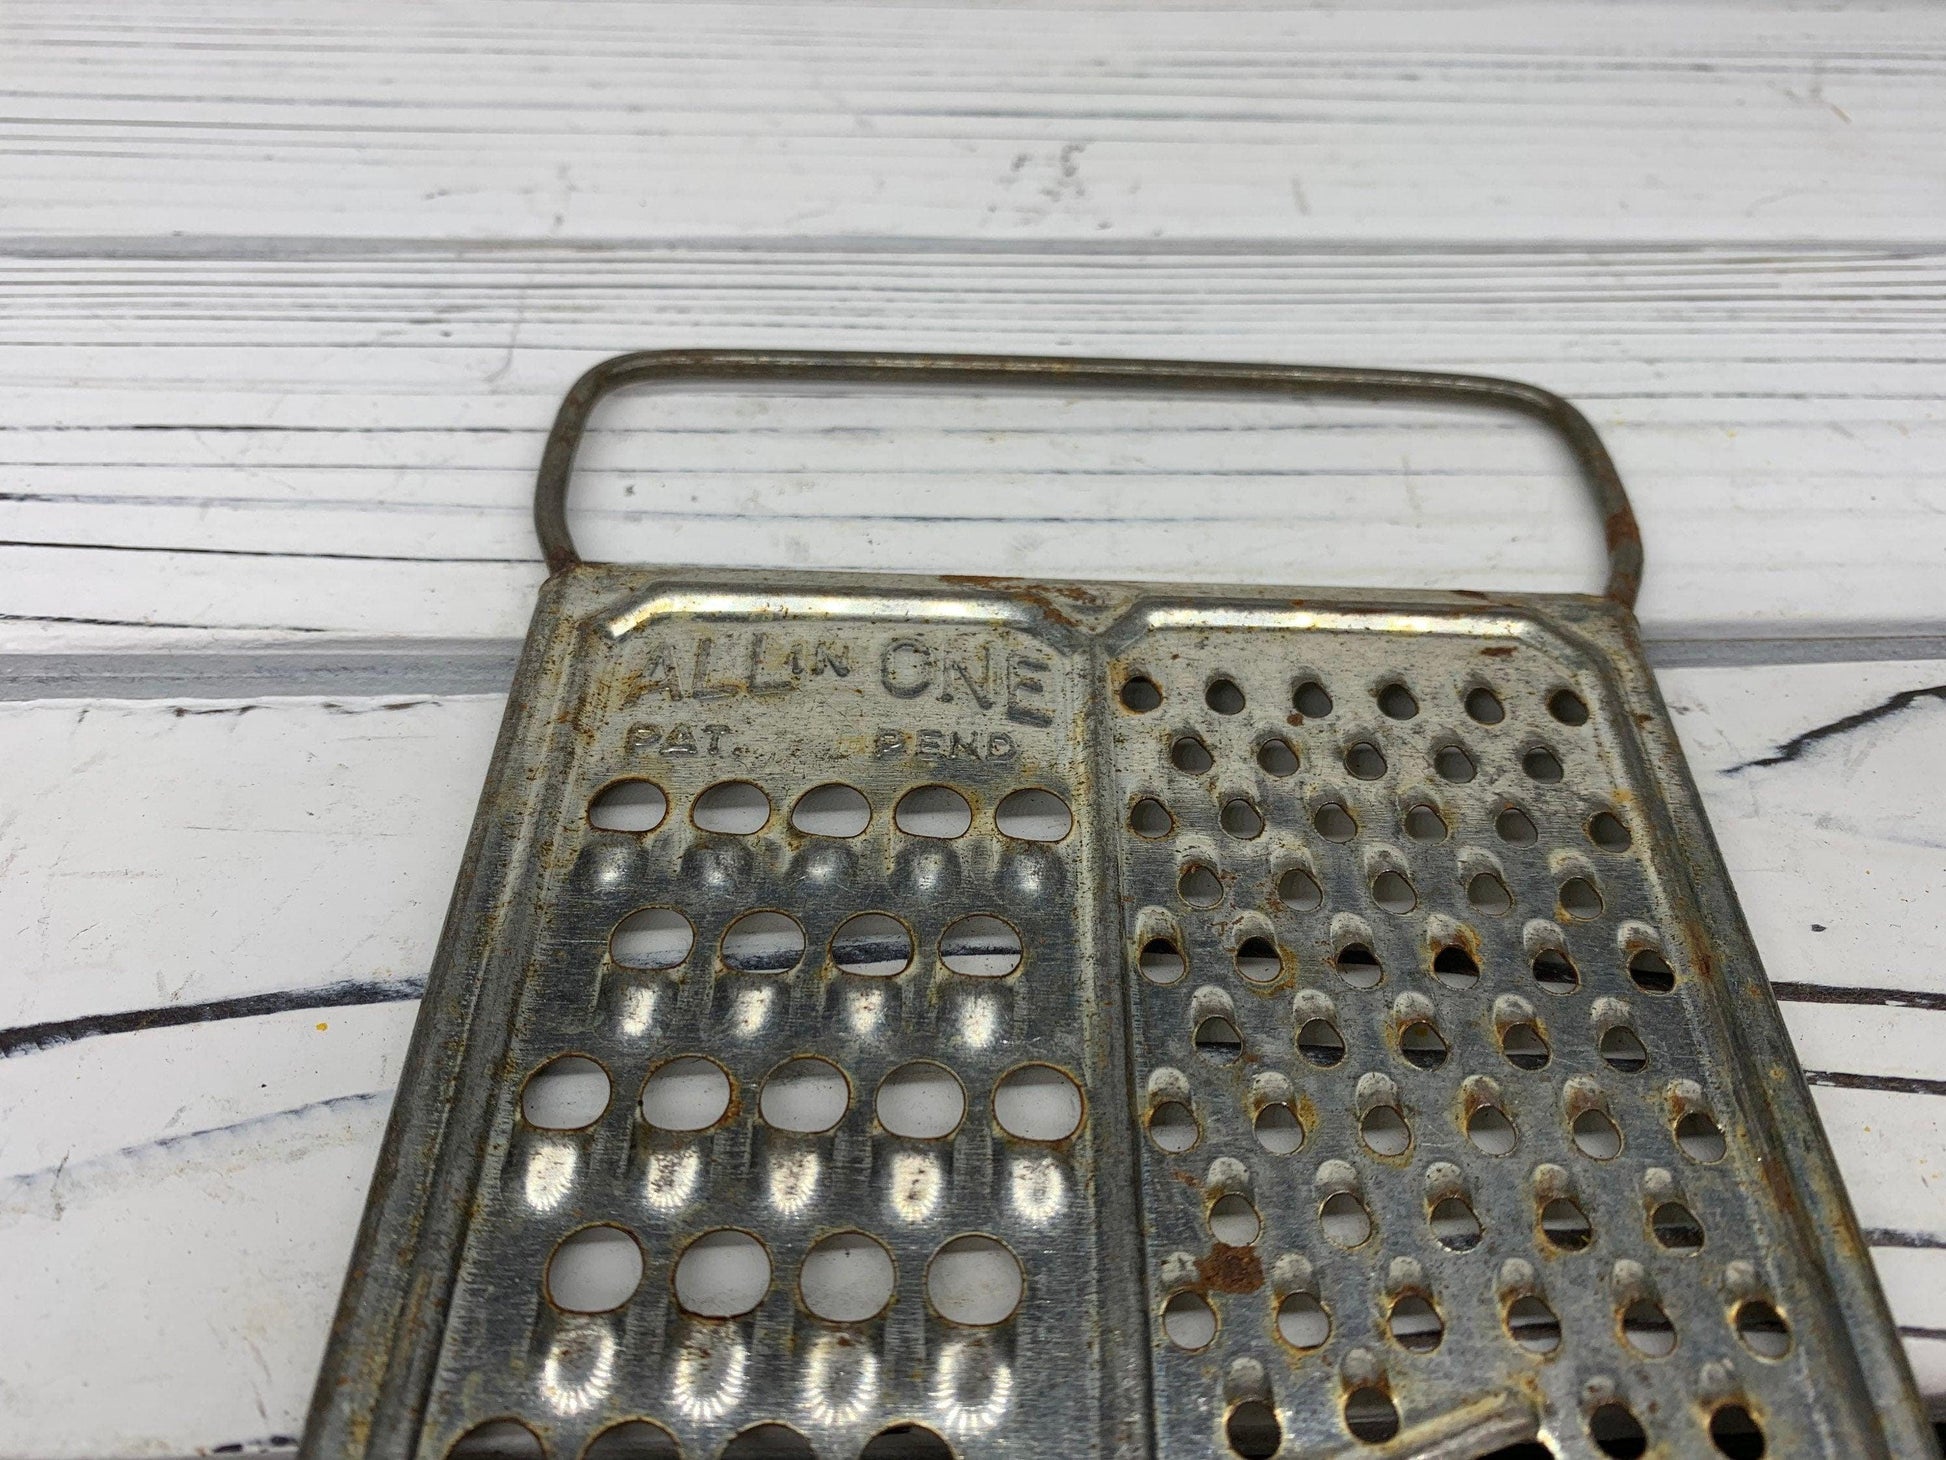 https://funkyhousevintage.com/cdn/shop/files/vintage-metal-cheese-grater-all-in-one-mid-century-grater-mid-century-kitchen-gadgets-shabby-chic-decor-located-at-funkyhouse-vintage-antique-store-weiser-idaho-4_0e8204a0-2114-42f4-aa17-2d3cf7a7753e.jpg?v=1688593360&width=1946